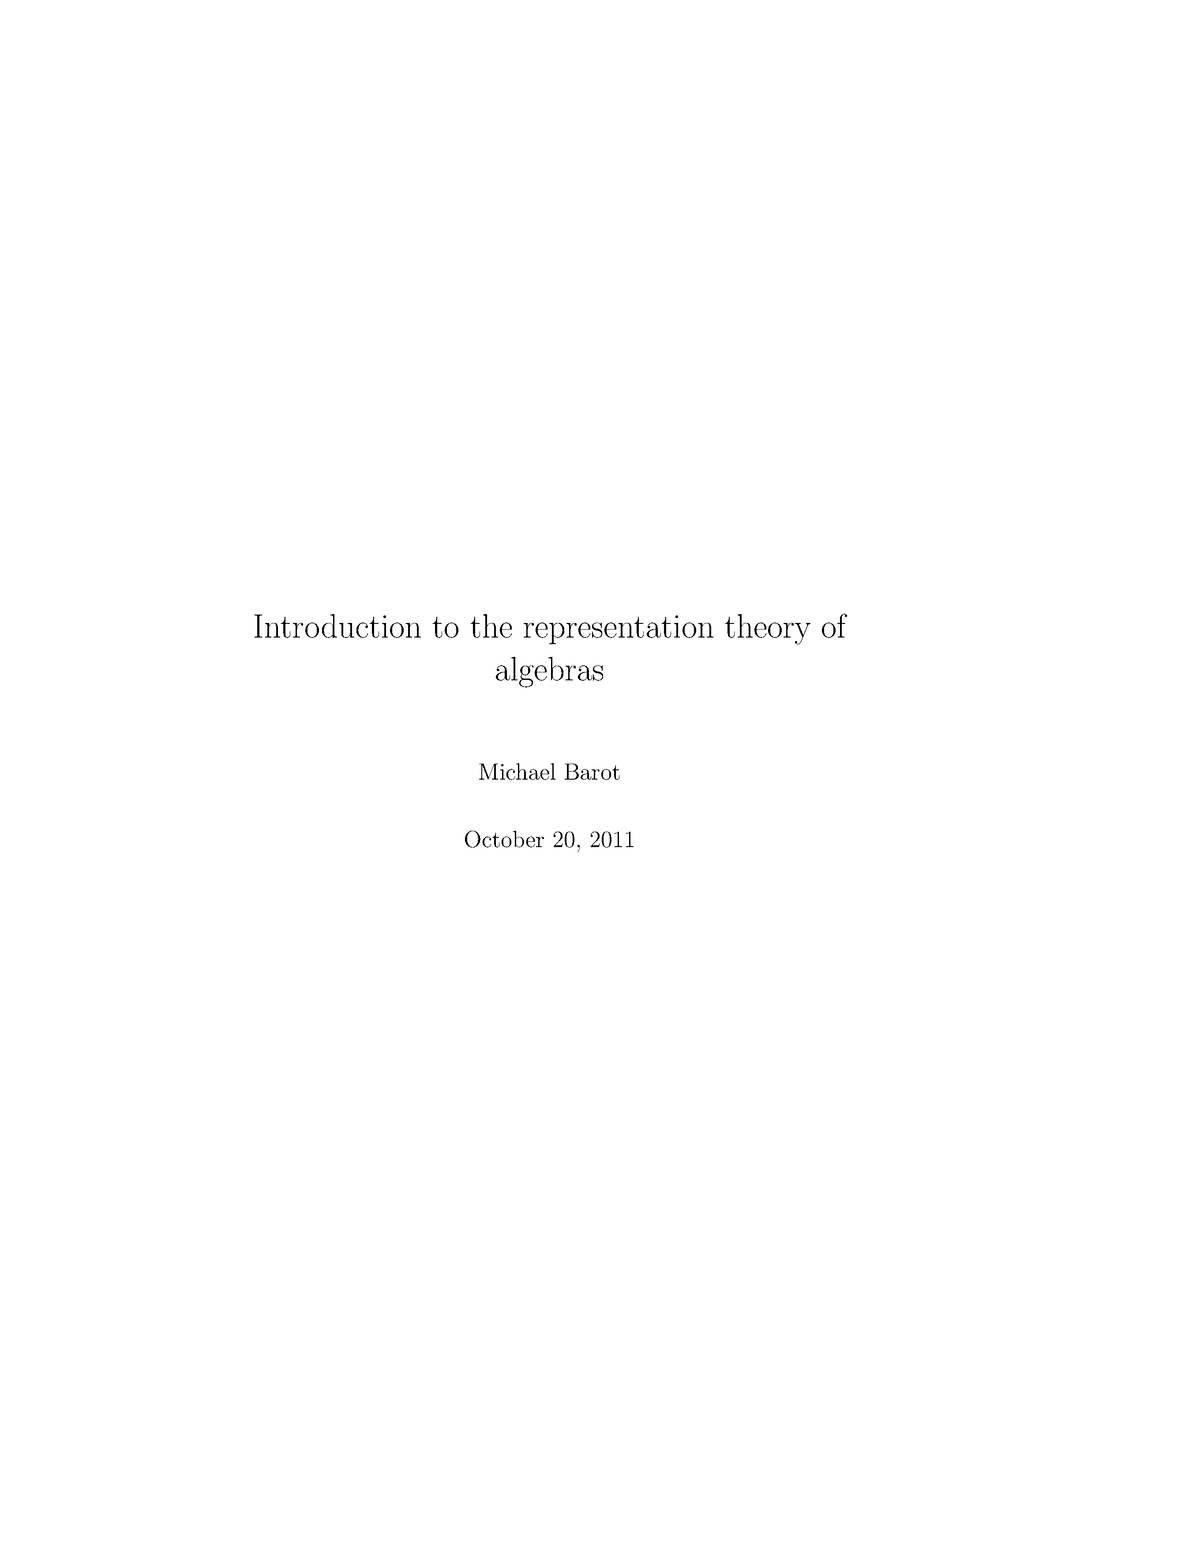 introduction to representation theory